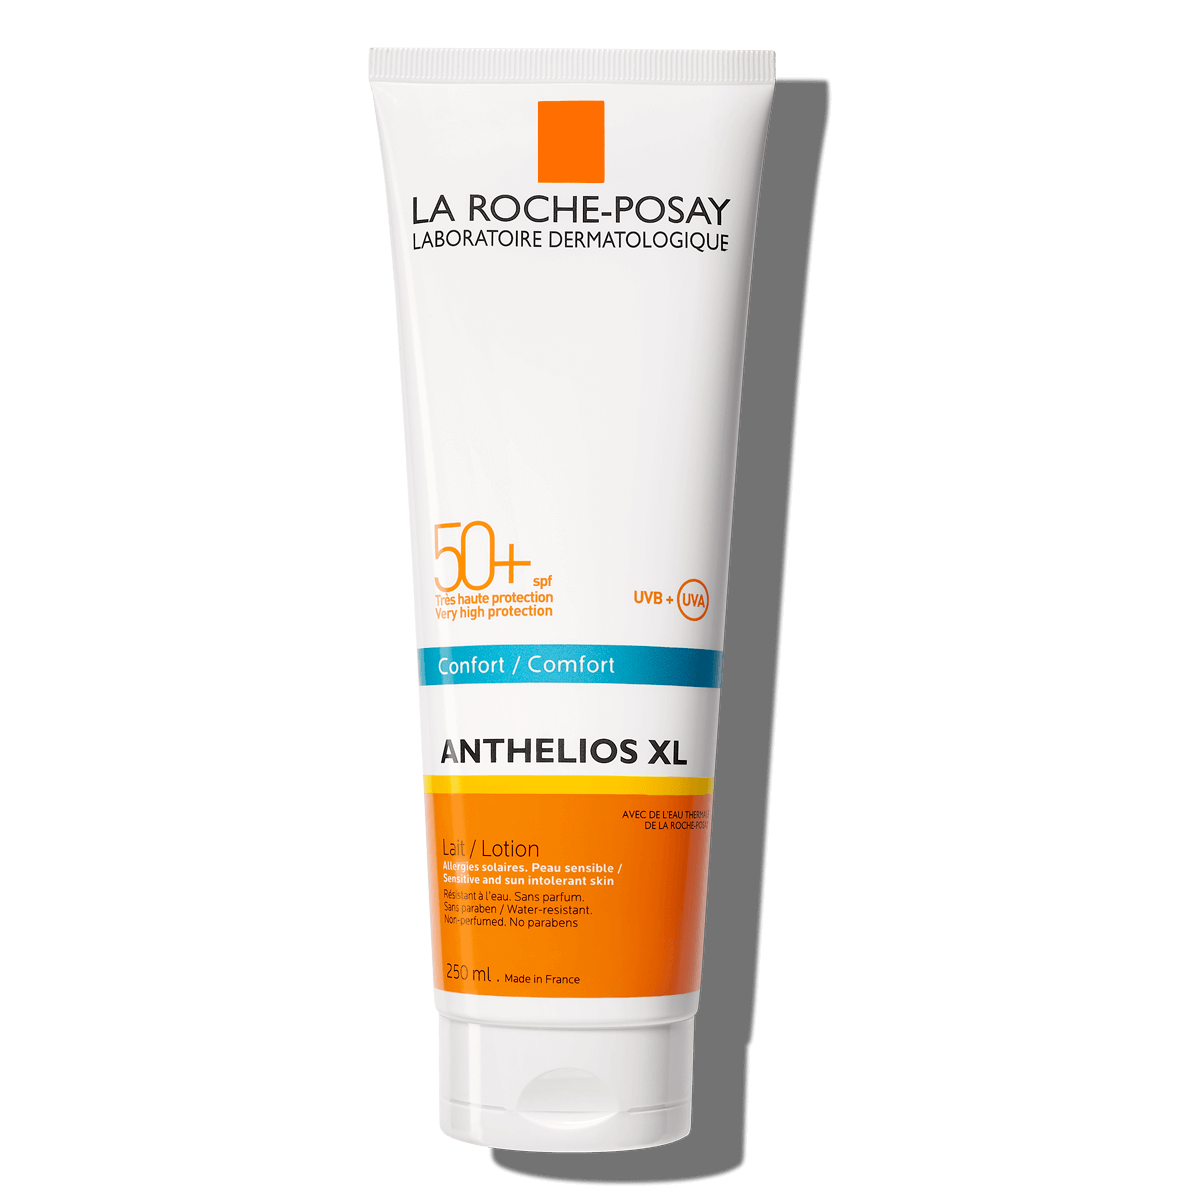 La Roche Posay ProductPage Sun Anthelios XL Smooth Lotion Spf50 250ml 